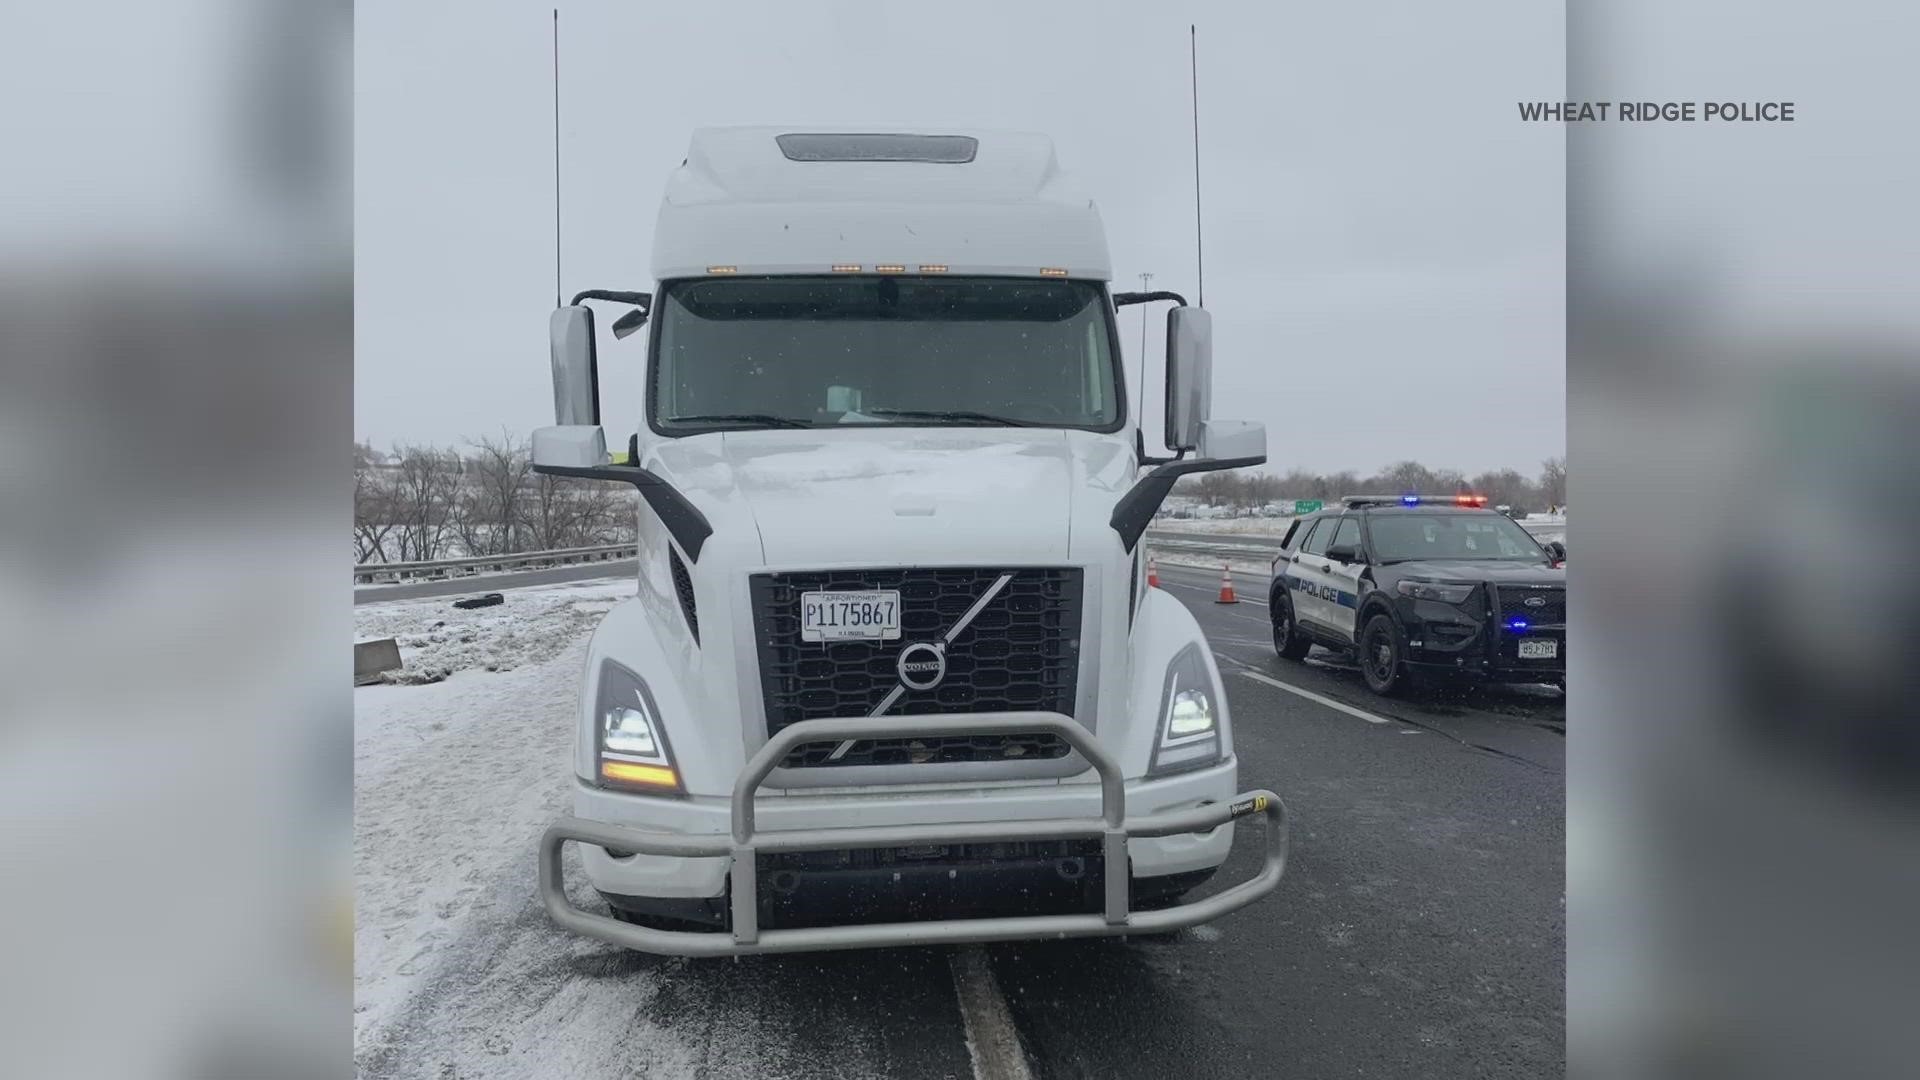 Wheat Ridge police are investigating an altercation on Interstate 70 near the Ward Road exit that left a truck driver shot early Sunday morning.